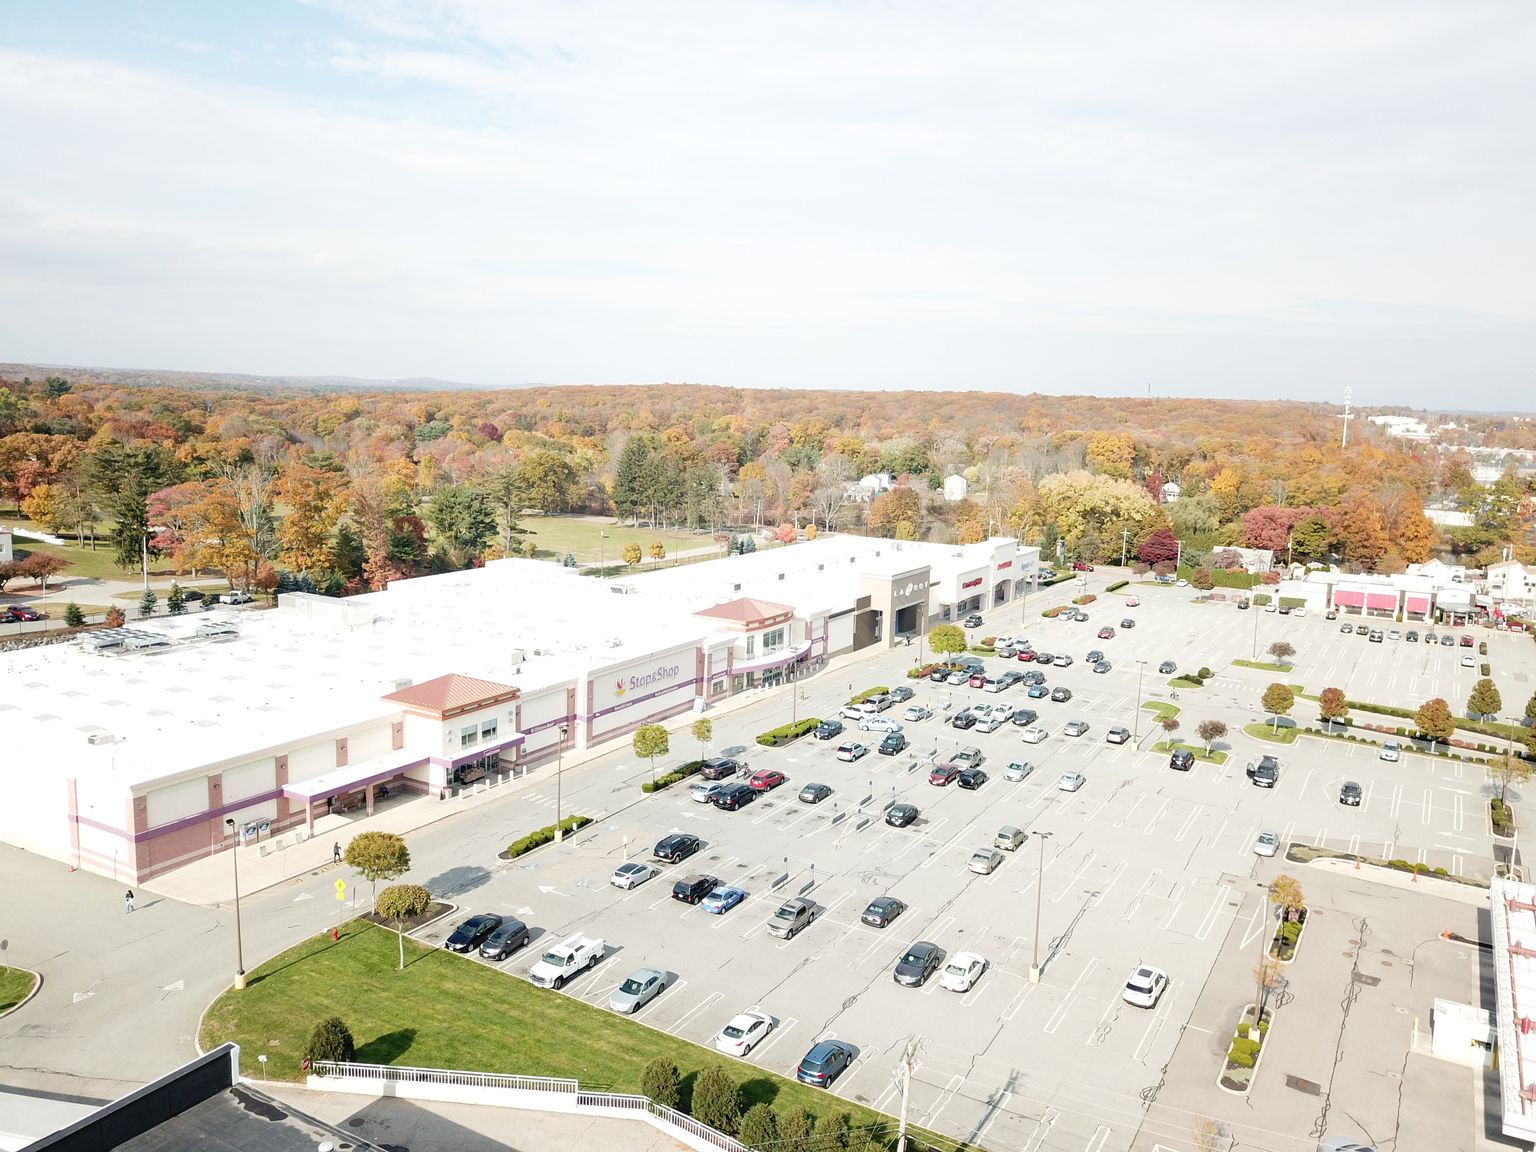 Commercial Retail Spaces for Lease- Marketplace Square